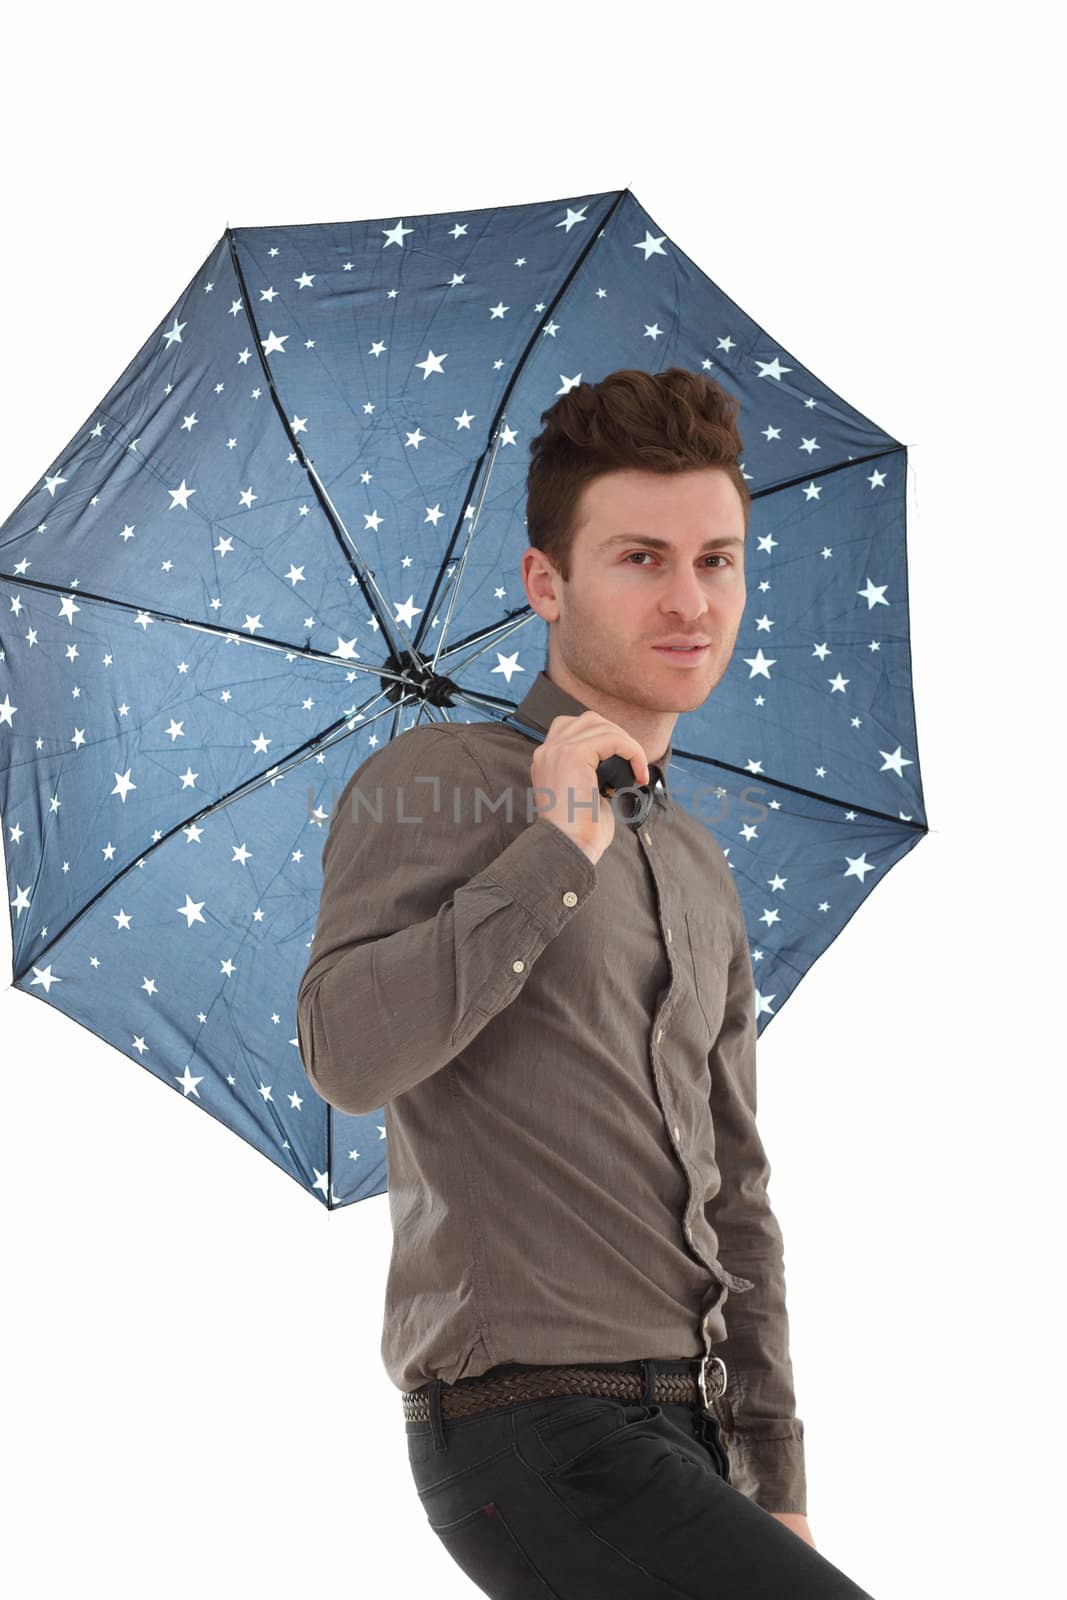 Handsome man with a blue umbrella with stars